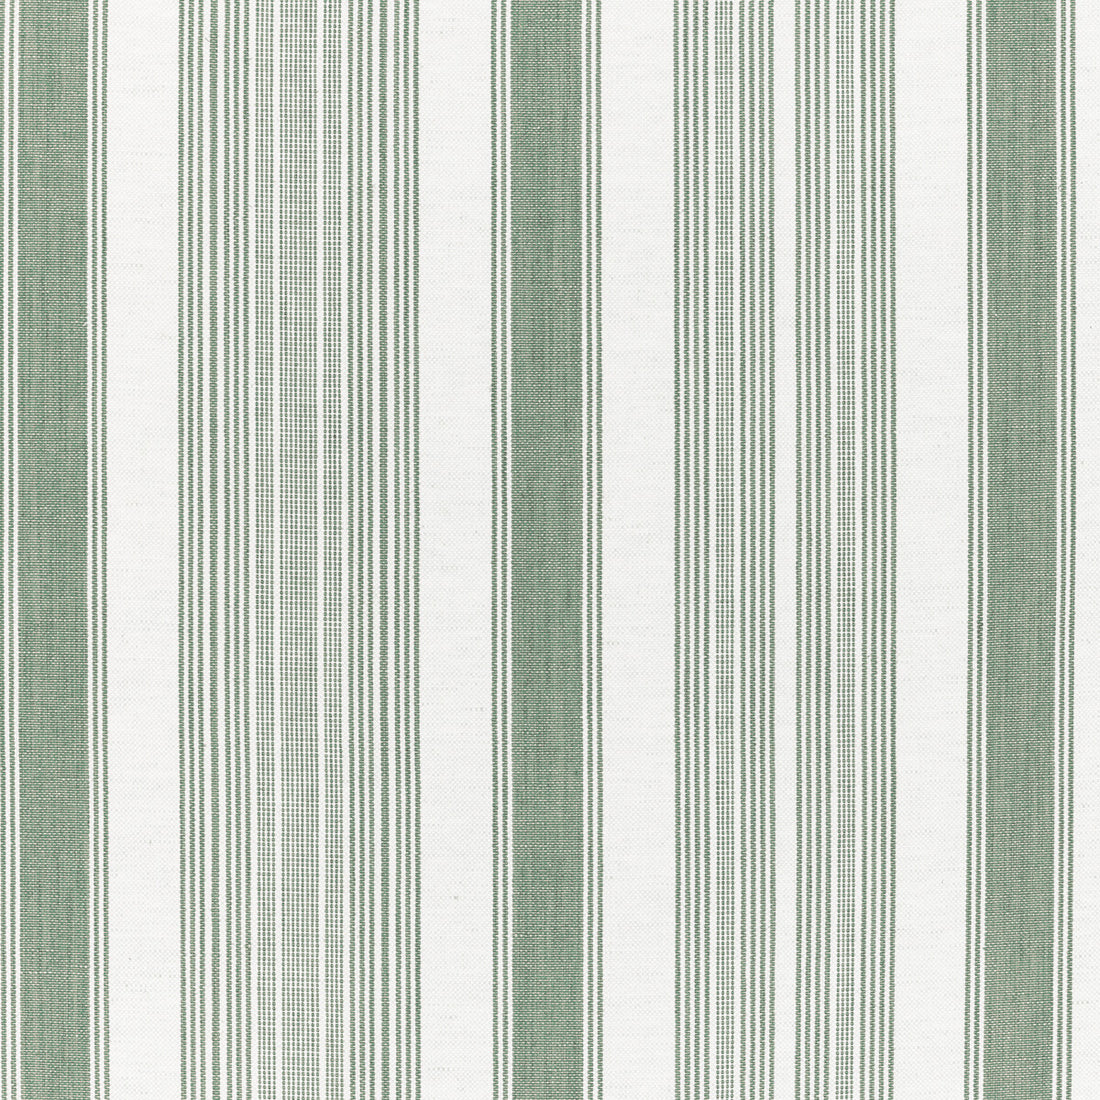 Tablada Stripe fabric in mist color - pattern 2021102.30.0 - by Lee Jofa in the Triana Weaves collection